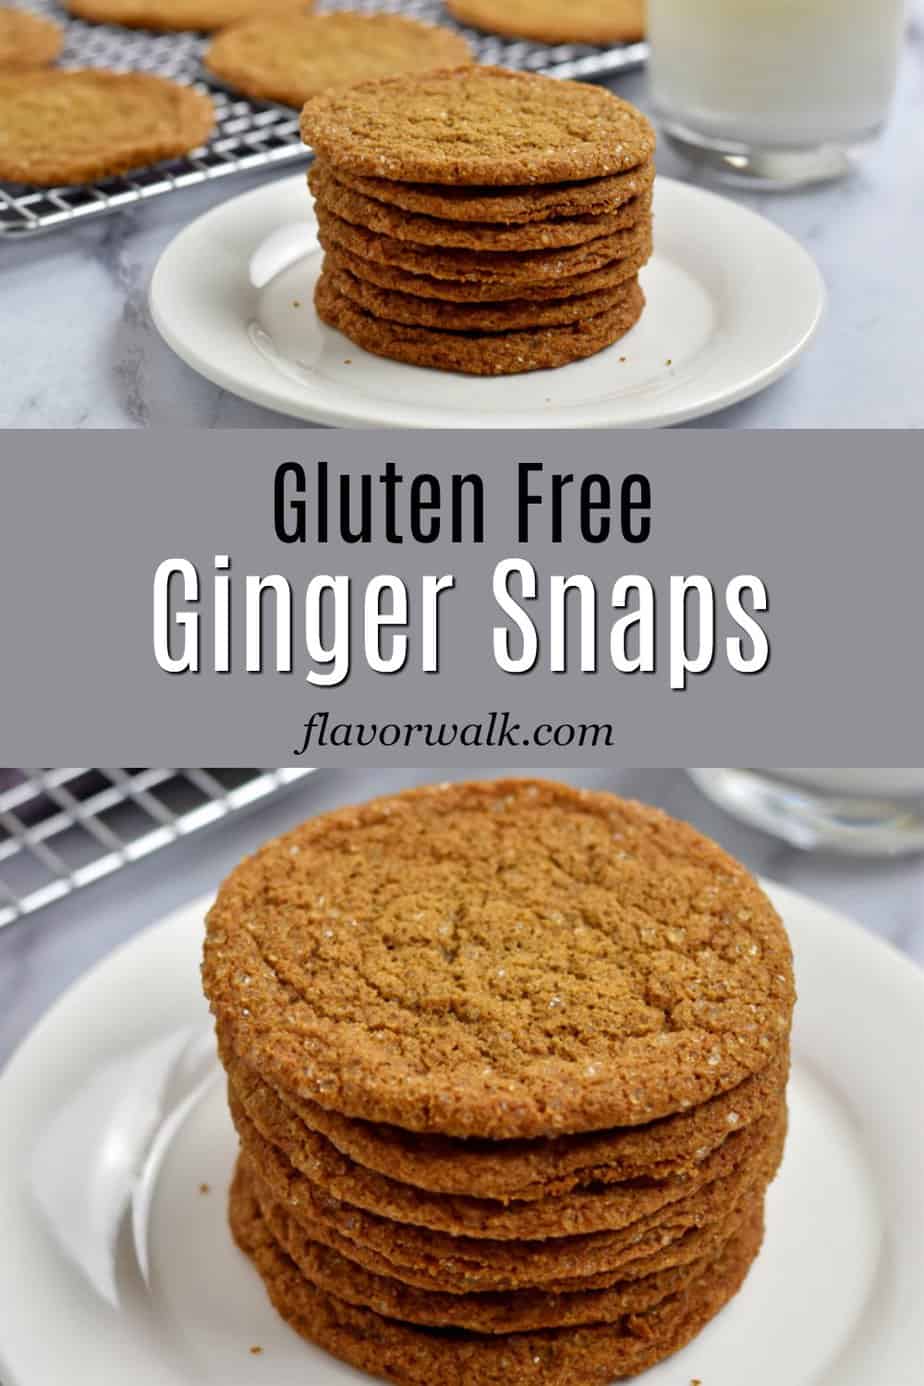 These Gluten Free Ginger Snaps are crisp around the edges, soft and chewy in the middle, and filled with bold flavor. They are the perfect cookie any time of year!